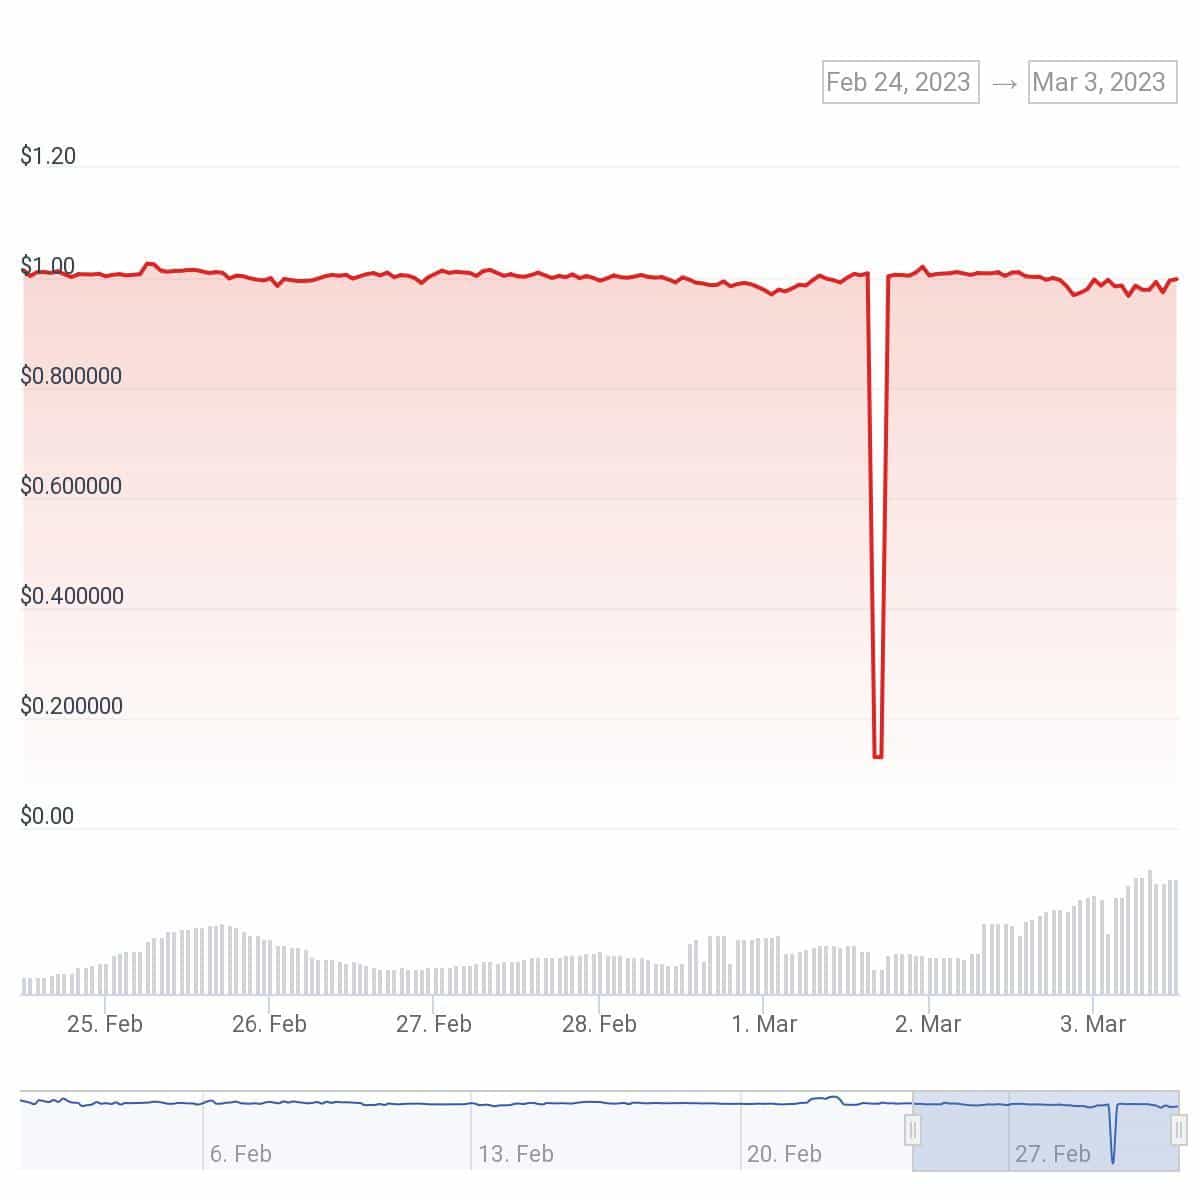 Cardano-powered Djed stablecoin crashes to $0.13 - 1